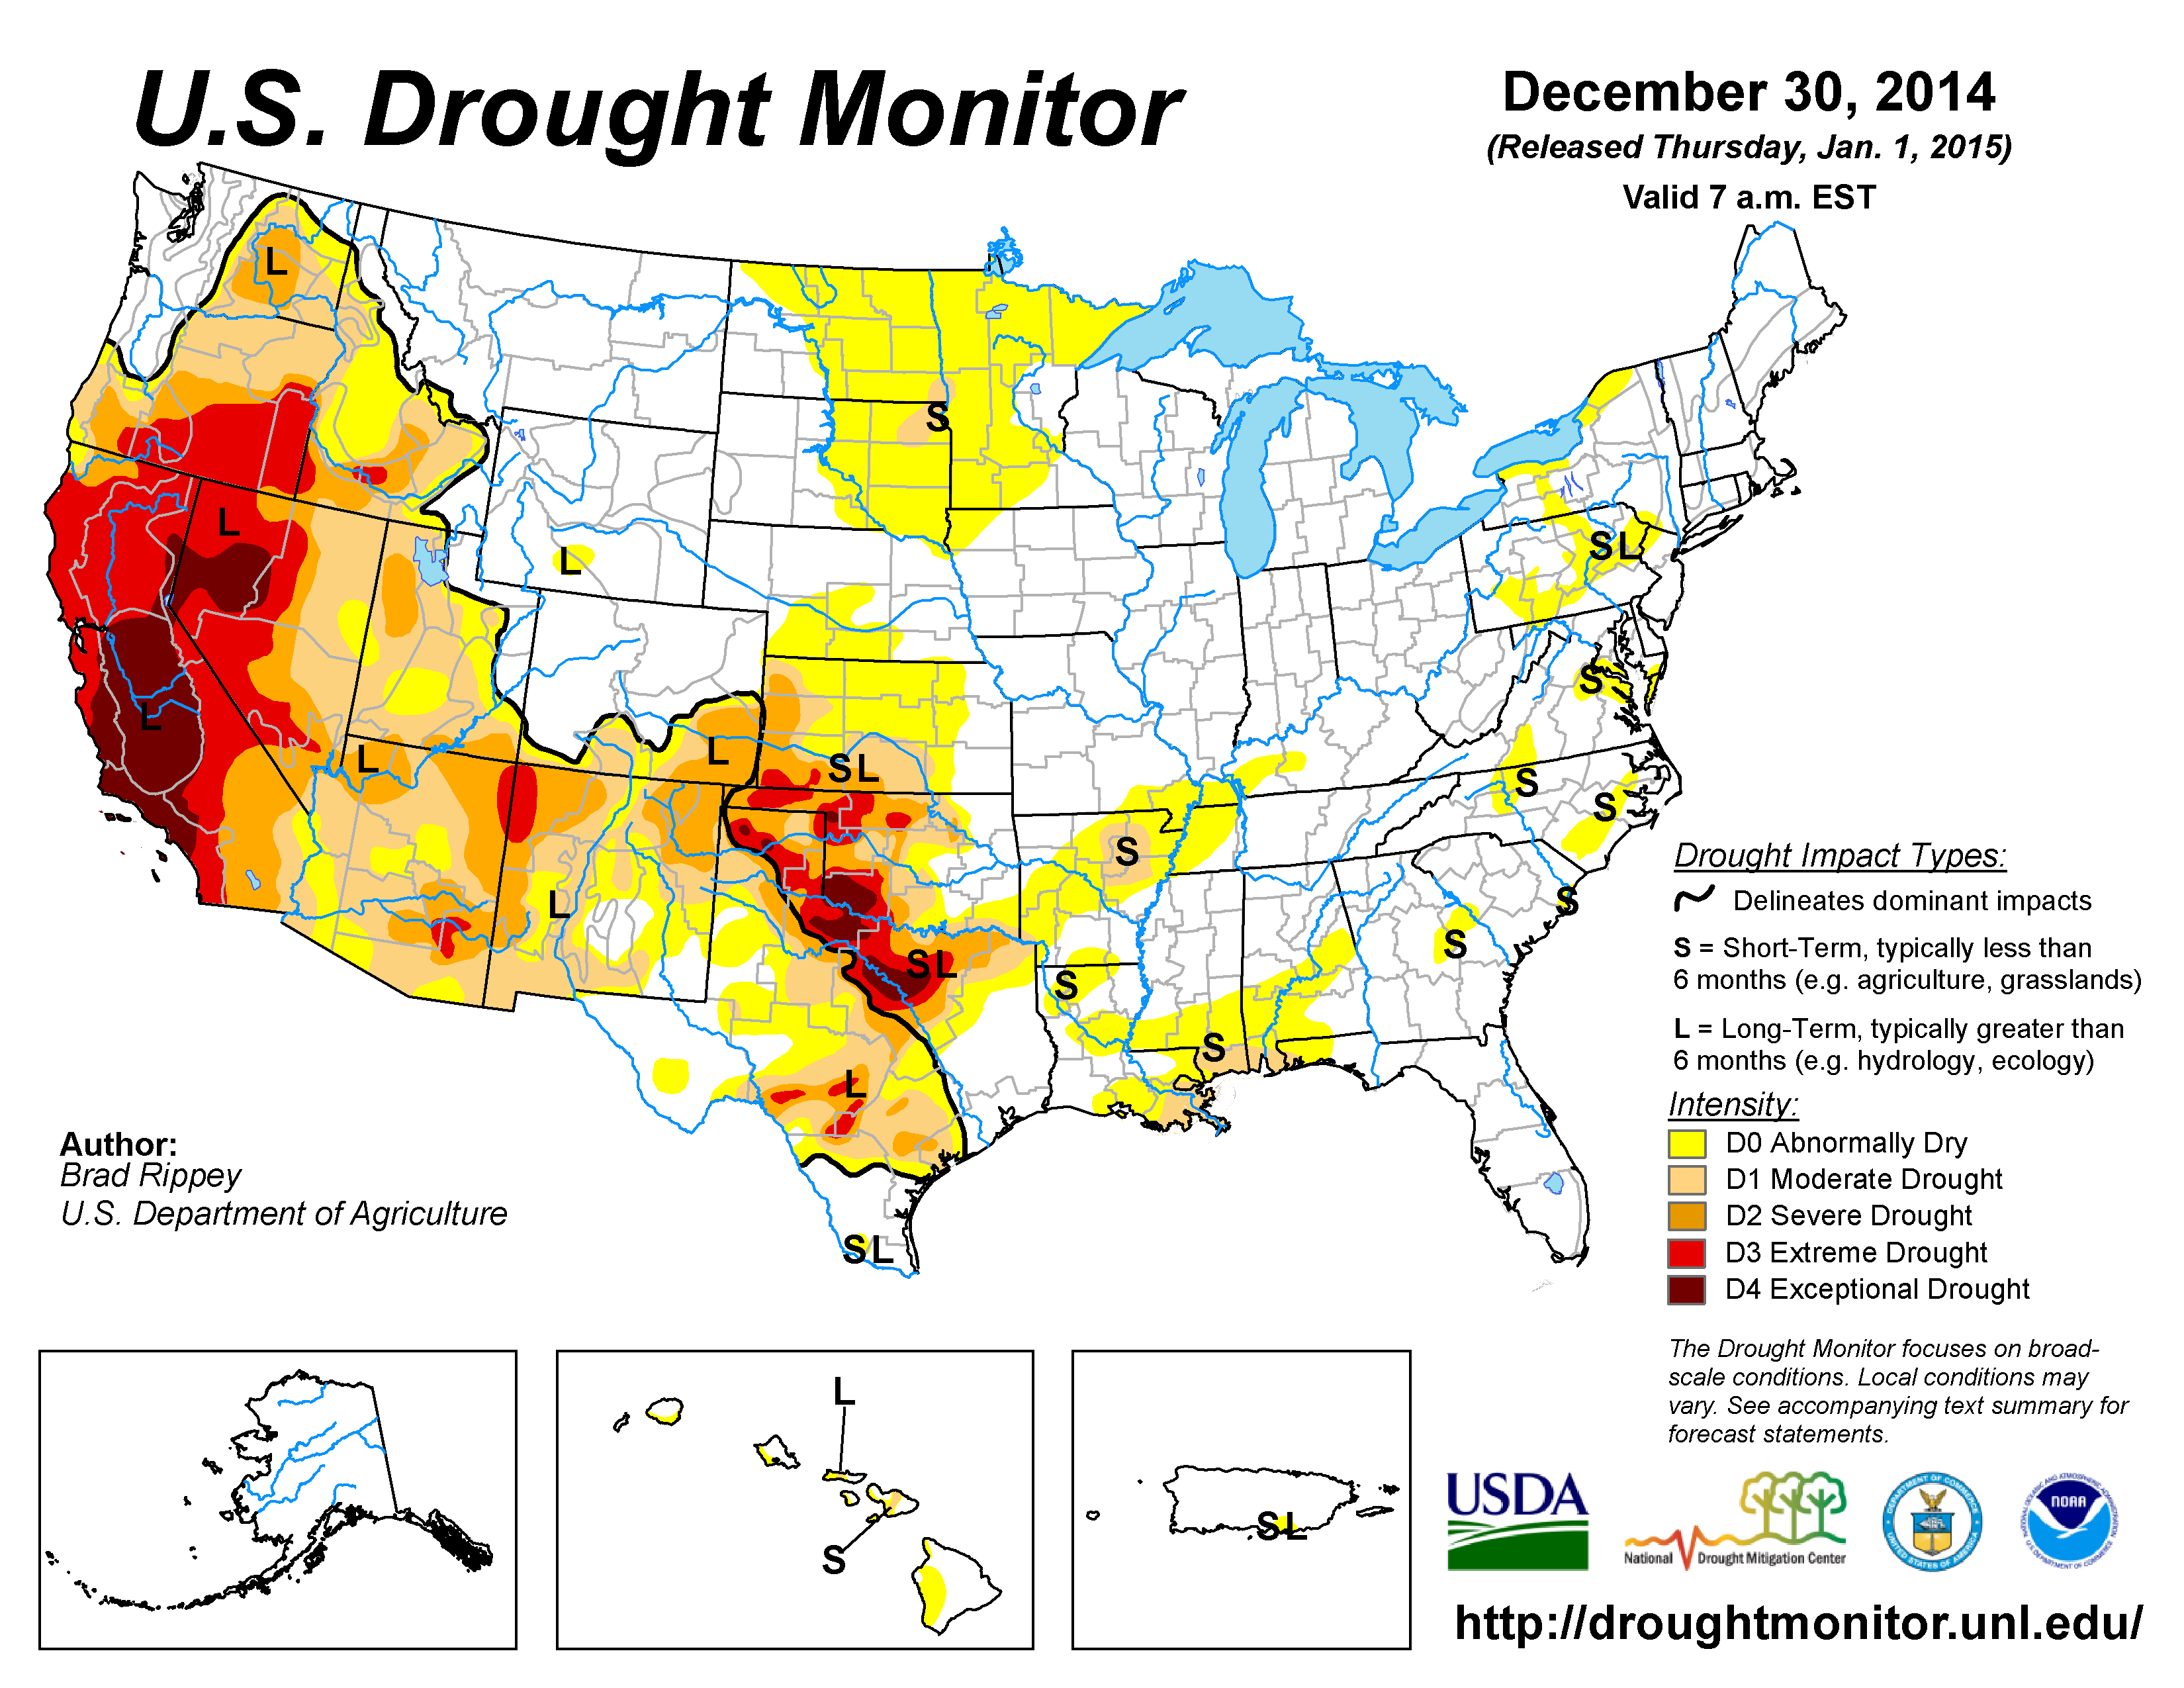 The U.S. Drought Monitor drought map valid December 30, 2014